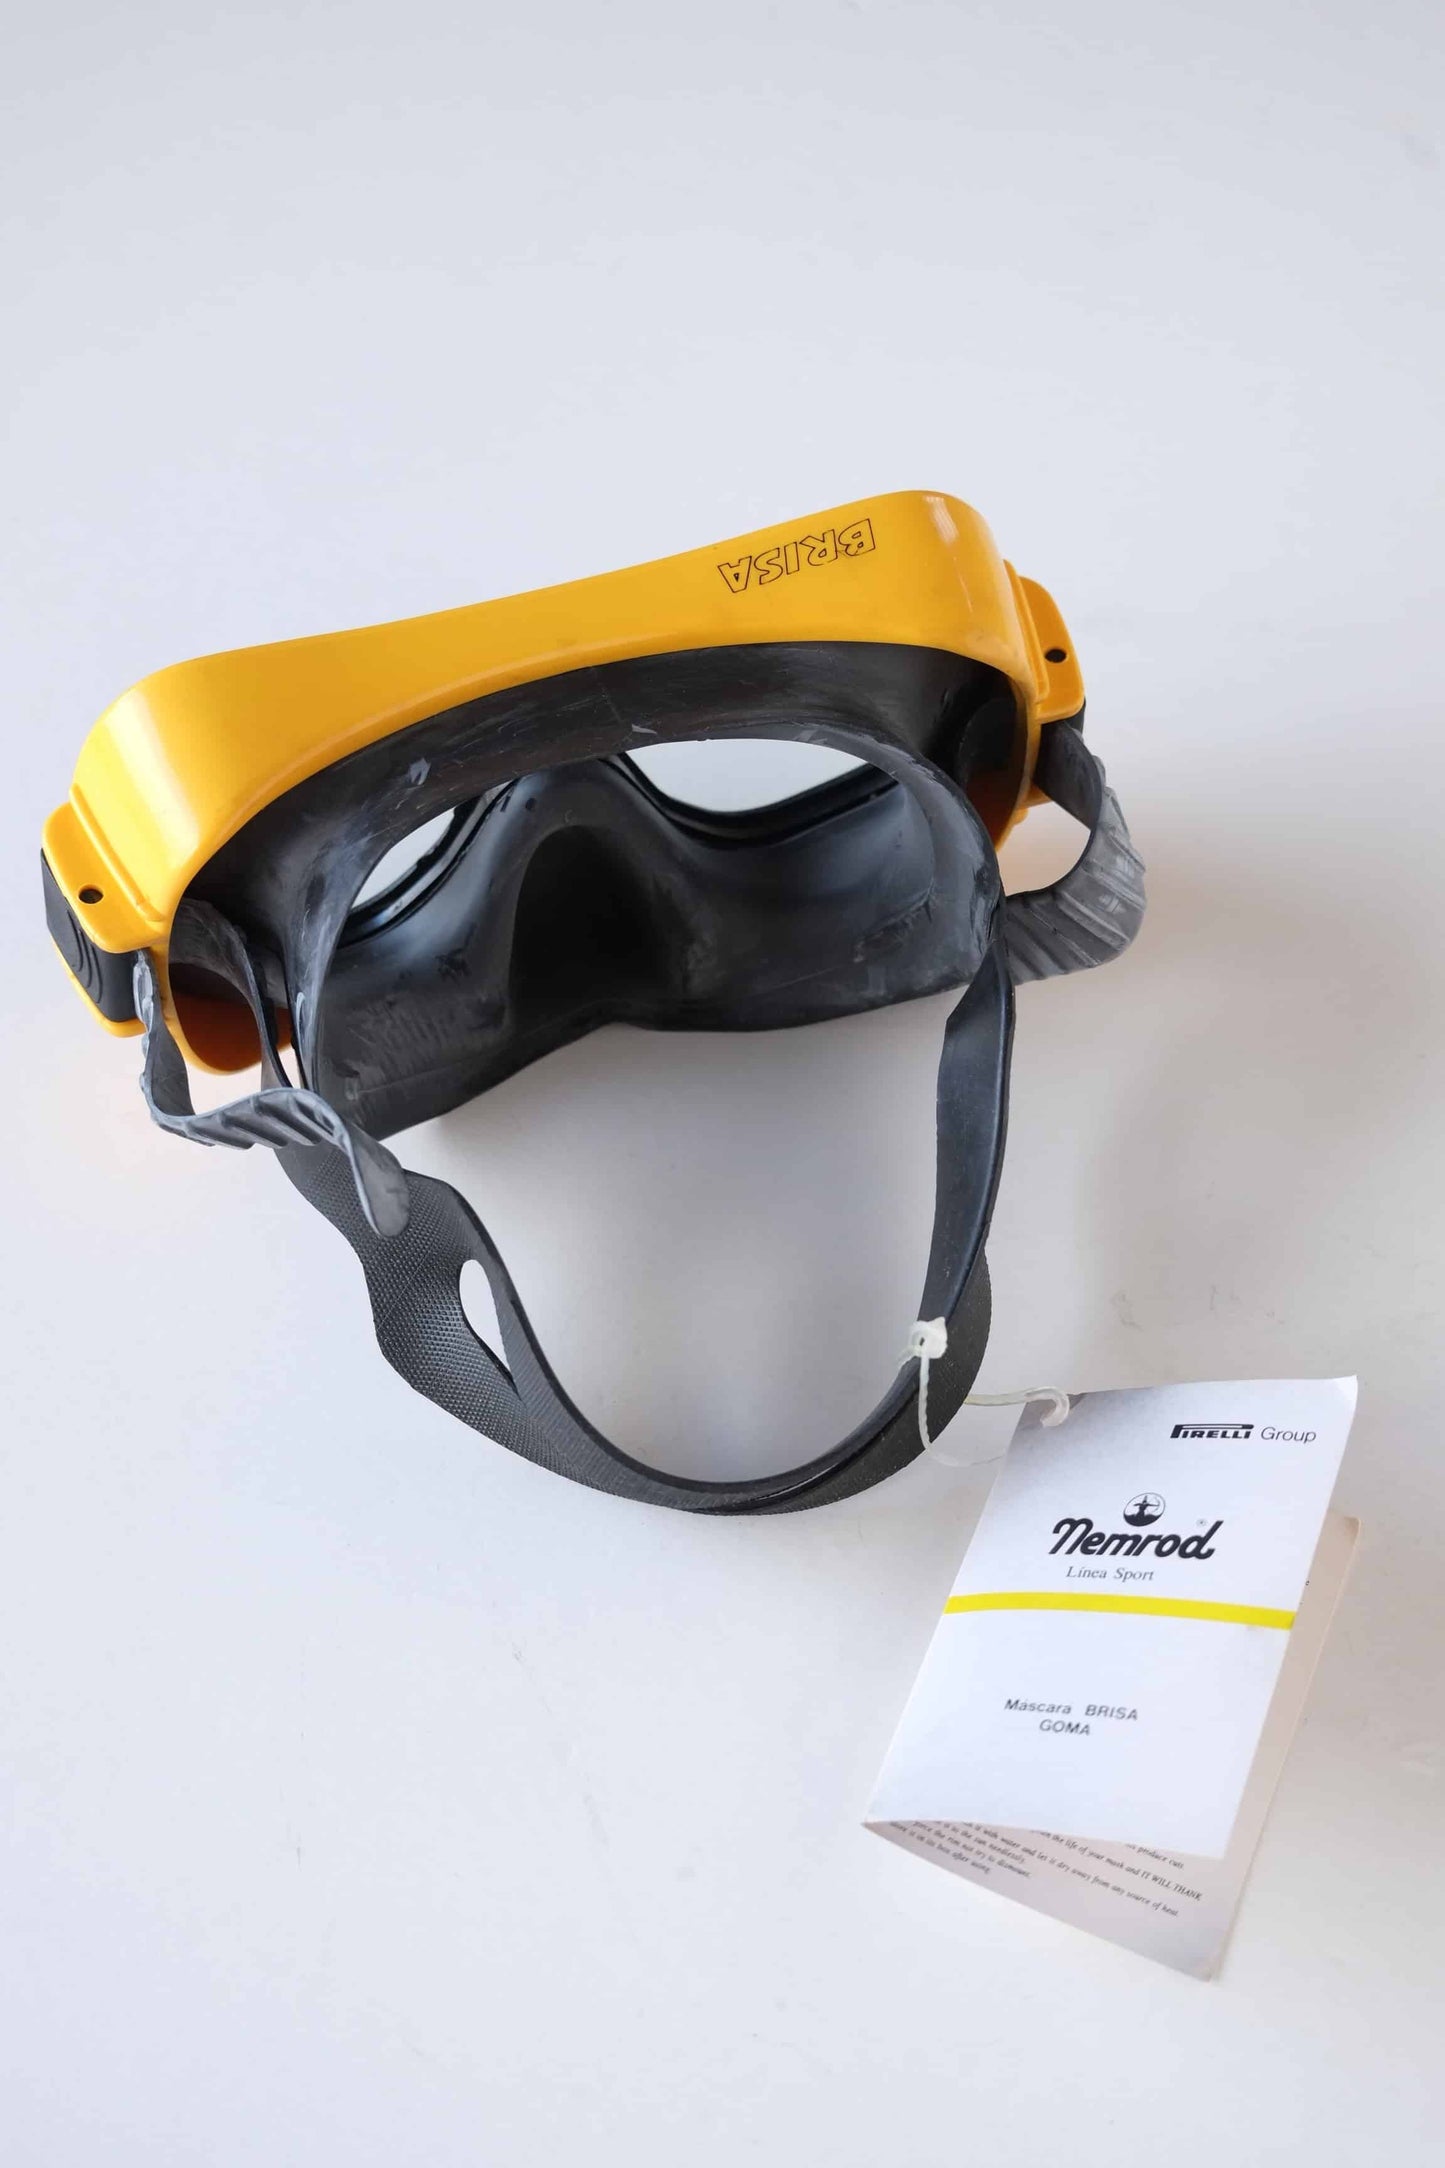 NEMROD Brisa 90's Diving Mask yellow and black from behind